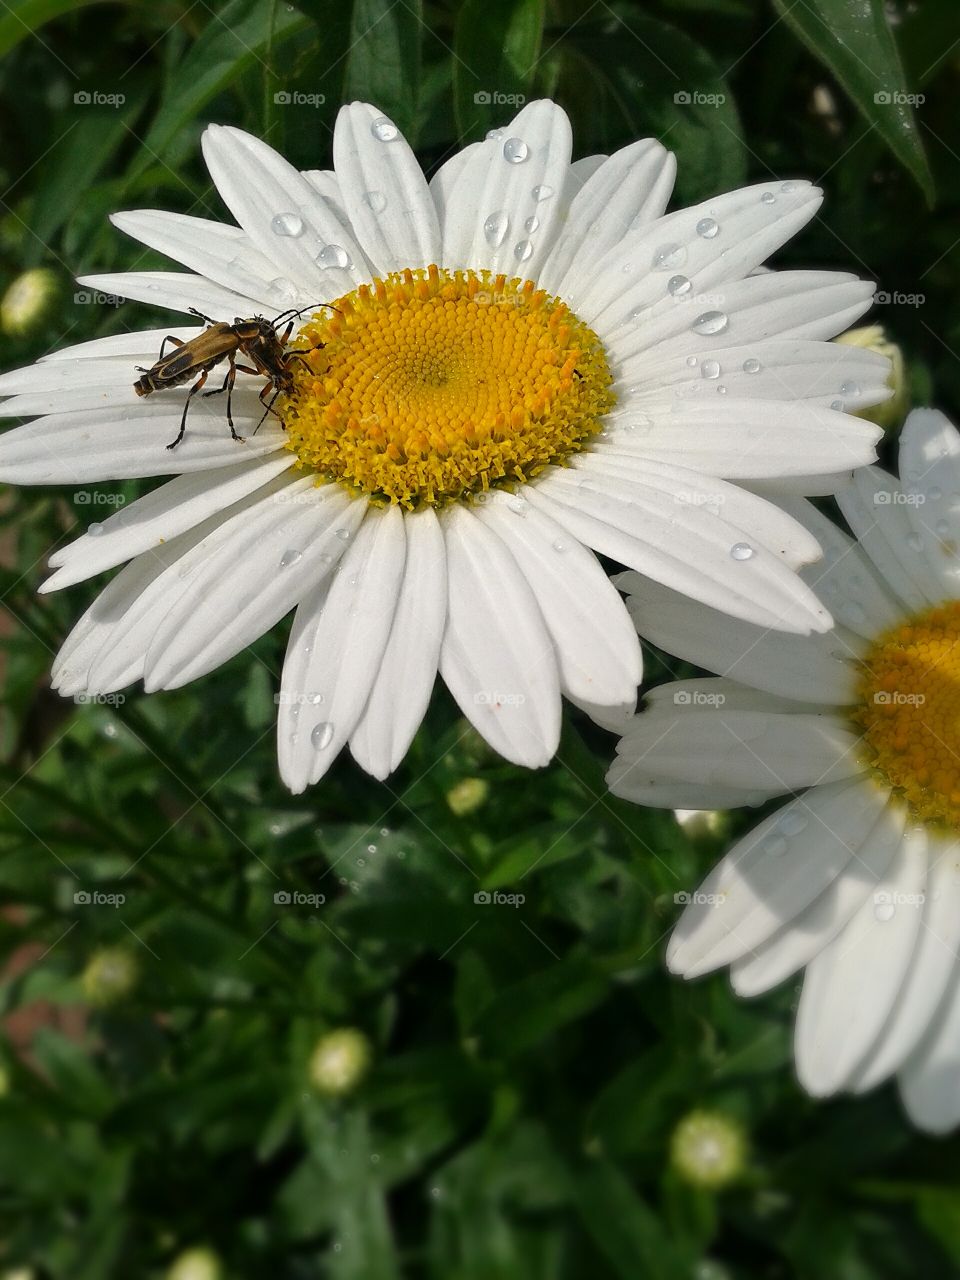 Tasty Daisys. Watching a small beetle on this flower.

Watching a small beetle on this bloom.